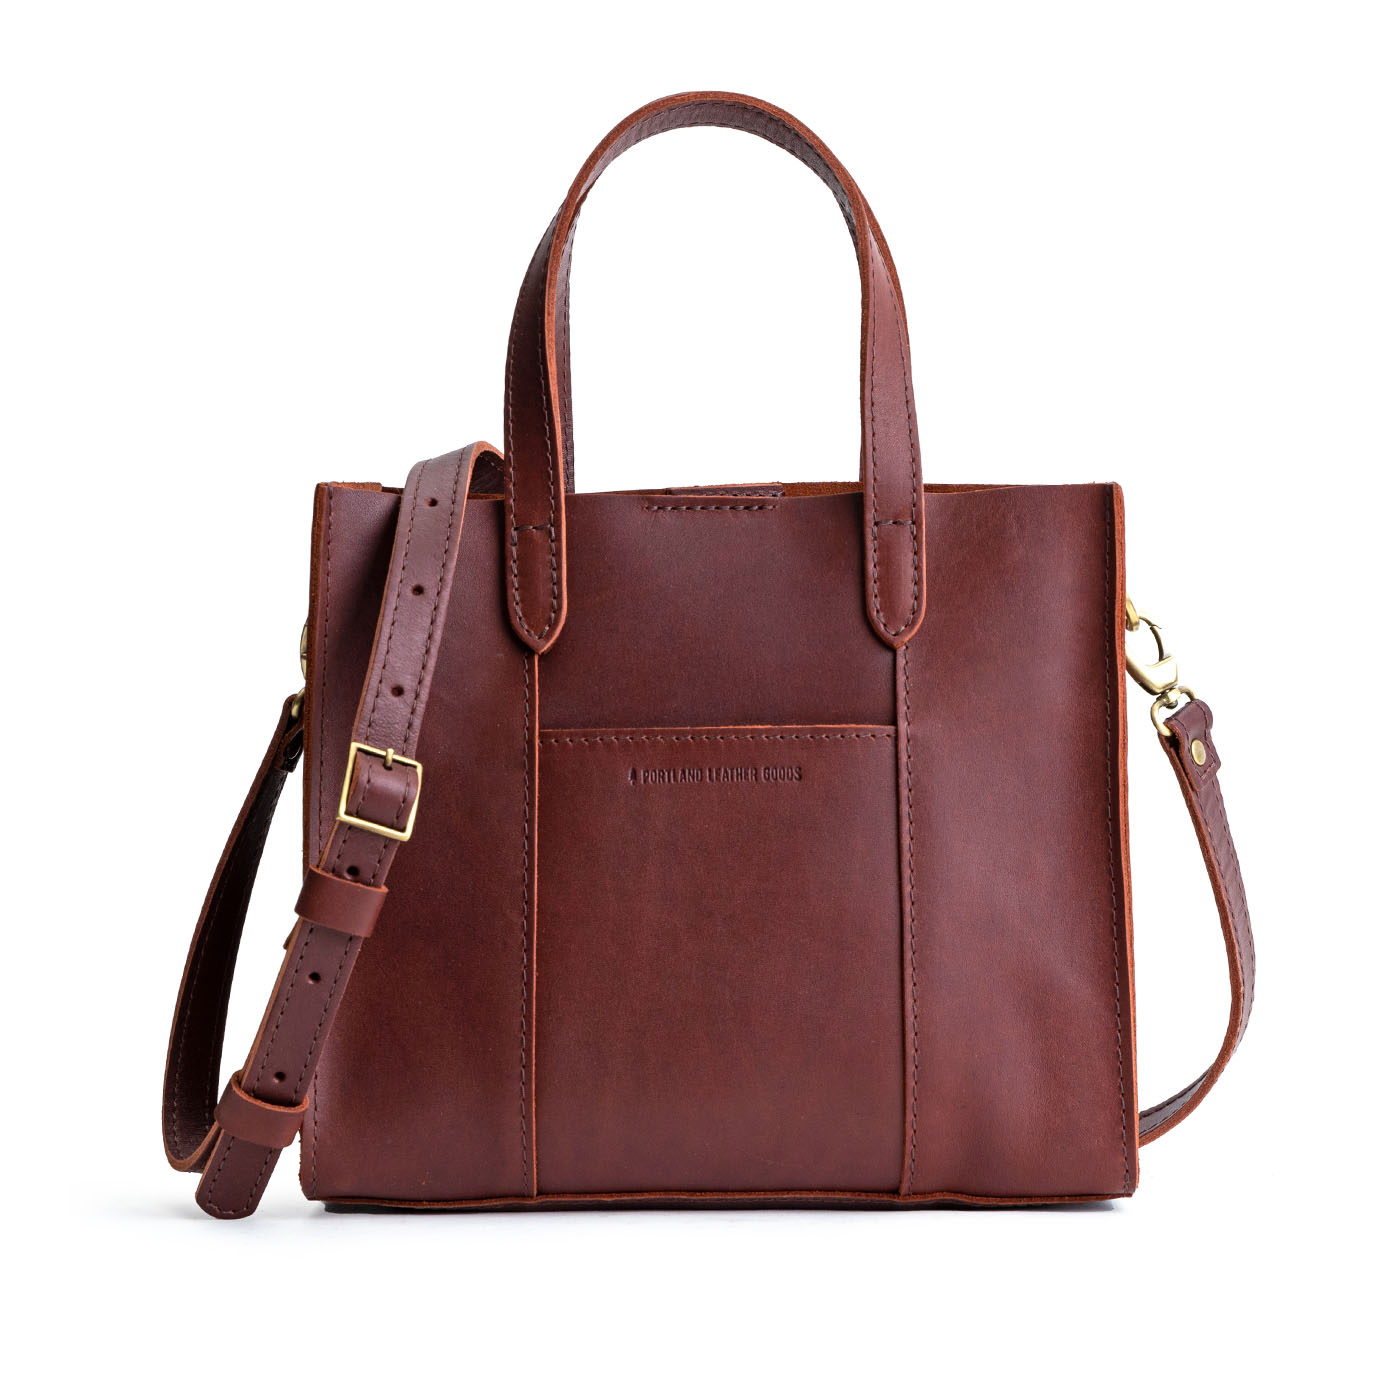 The Perfect Insert for Lola Tote--Portland Leather Goods 